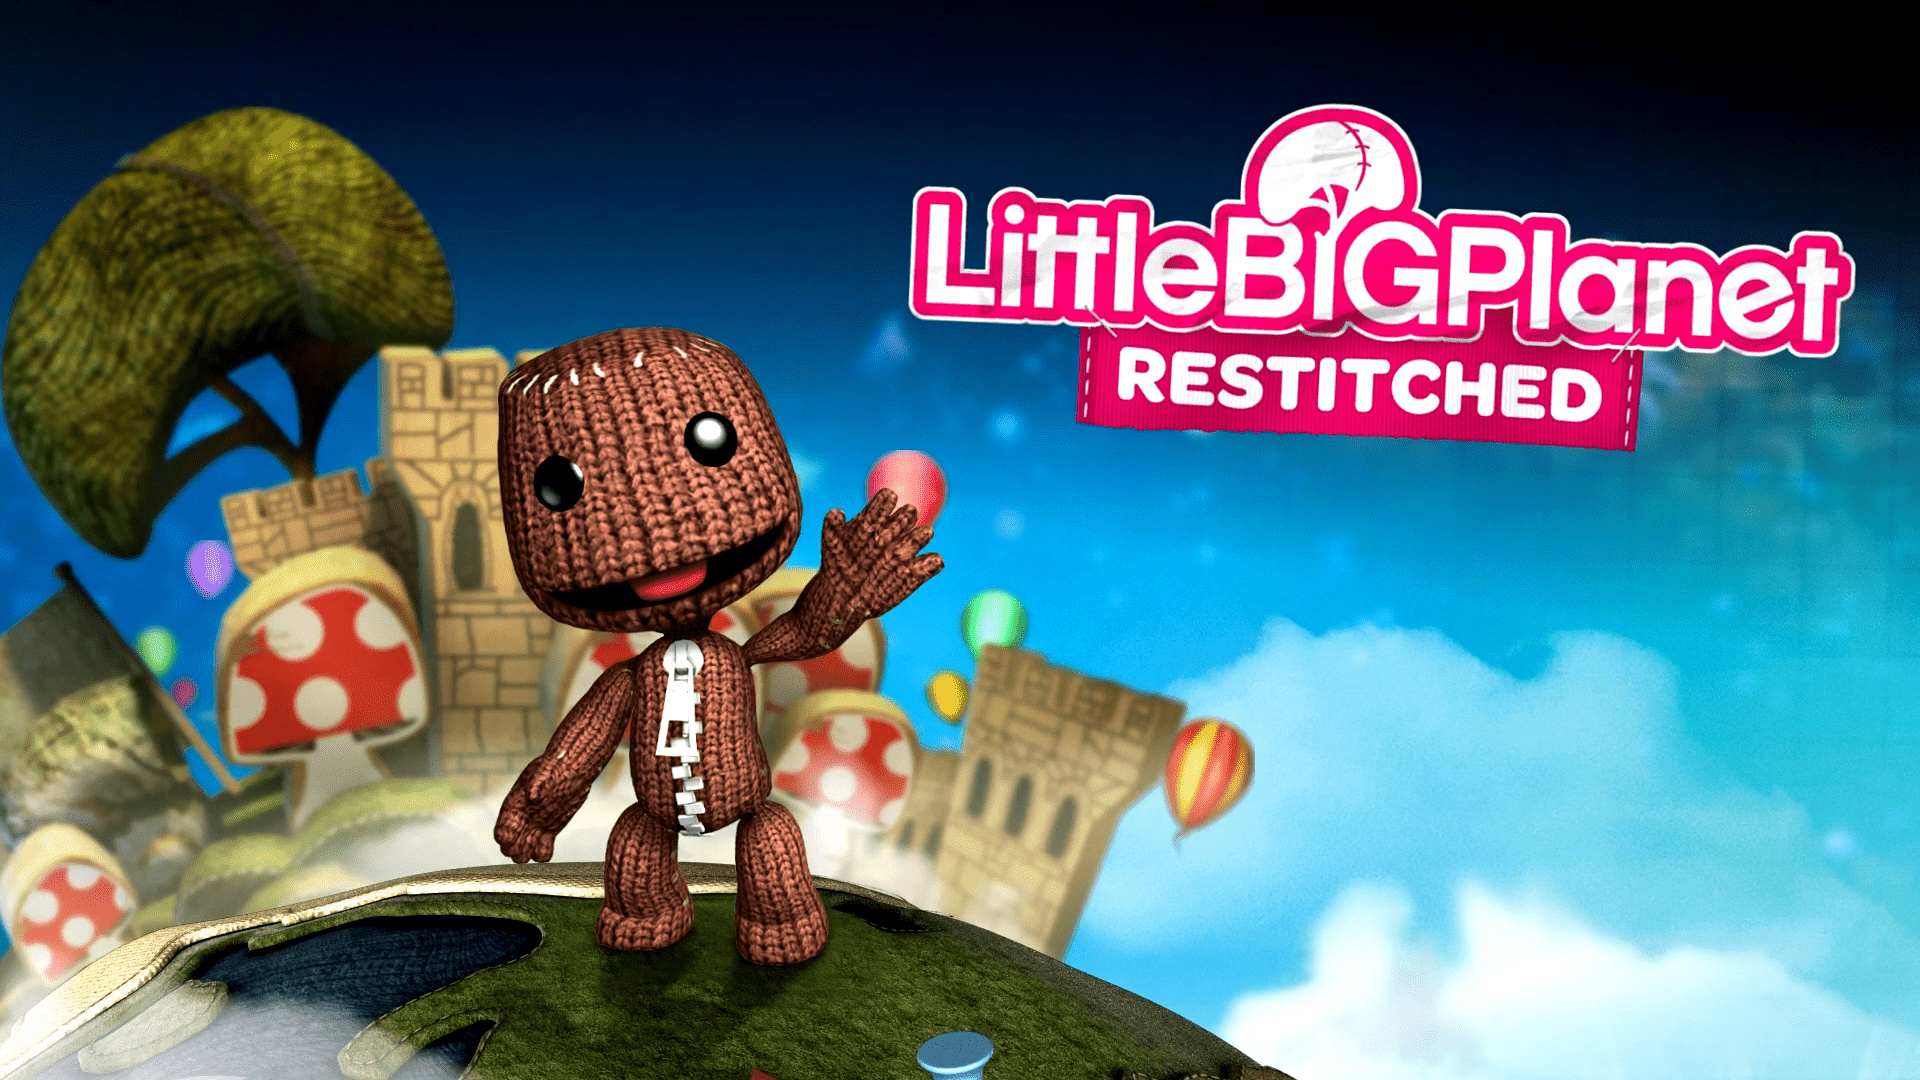 LBP Game, LittleBigPlanet Restitched project, Cease and desist, Sony Europe, 1920x1080 Full HD Desktop